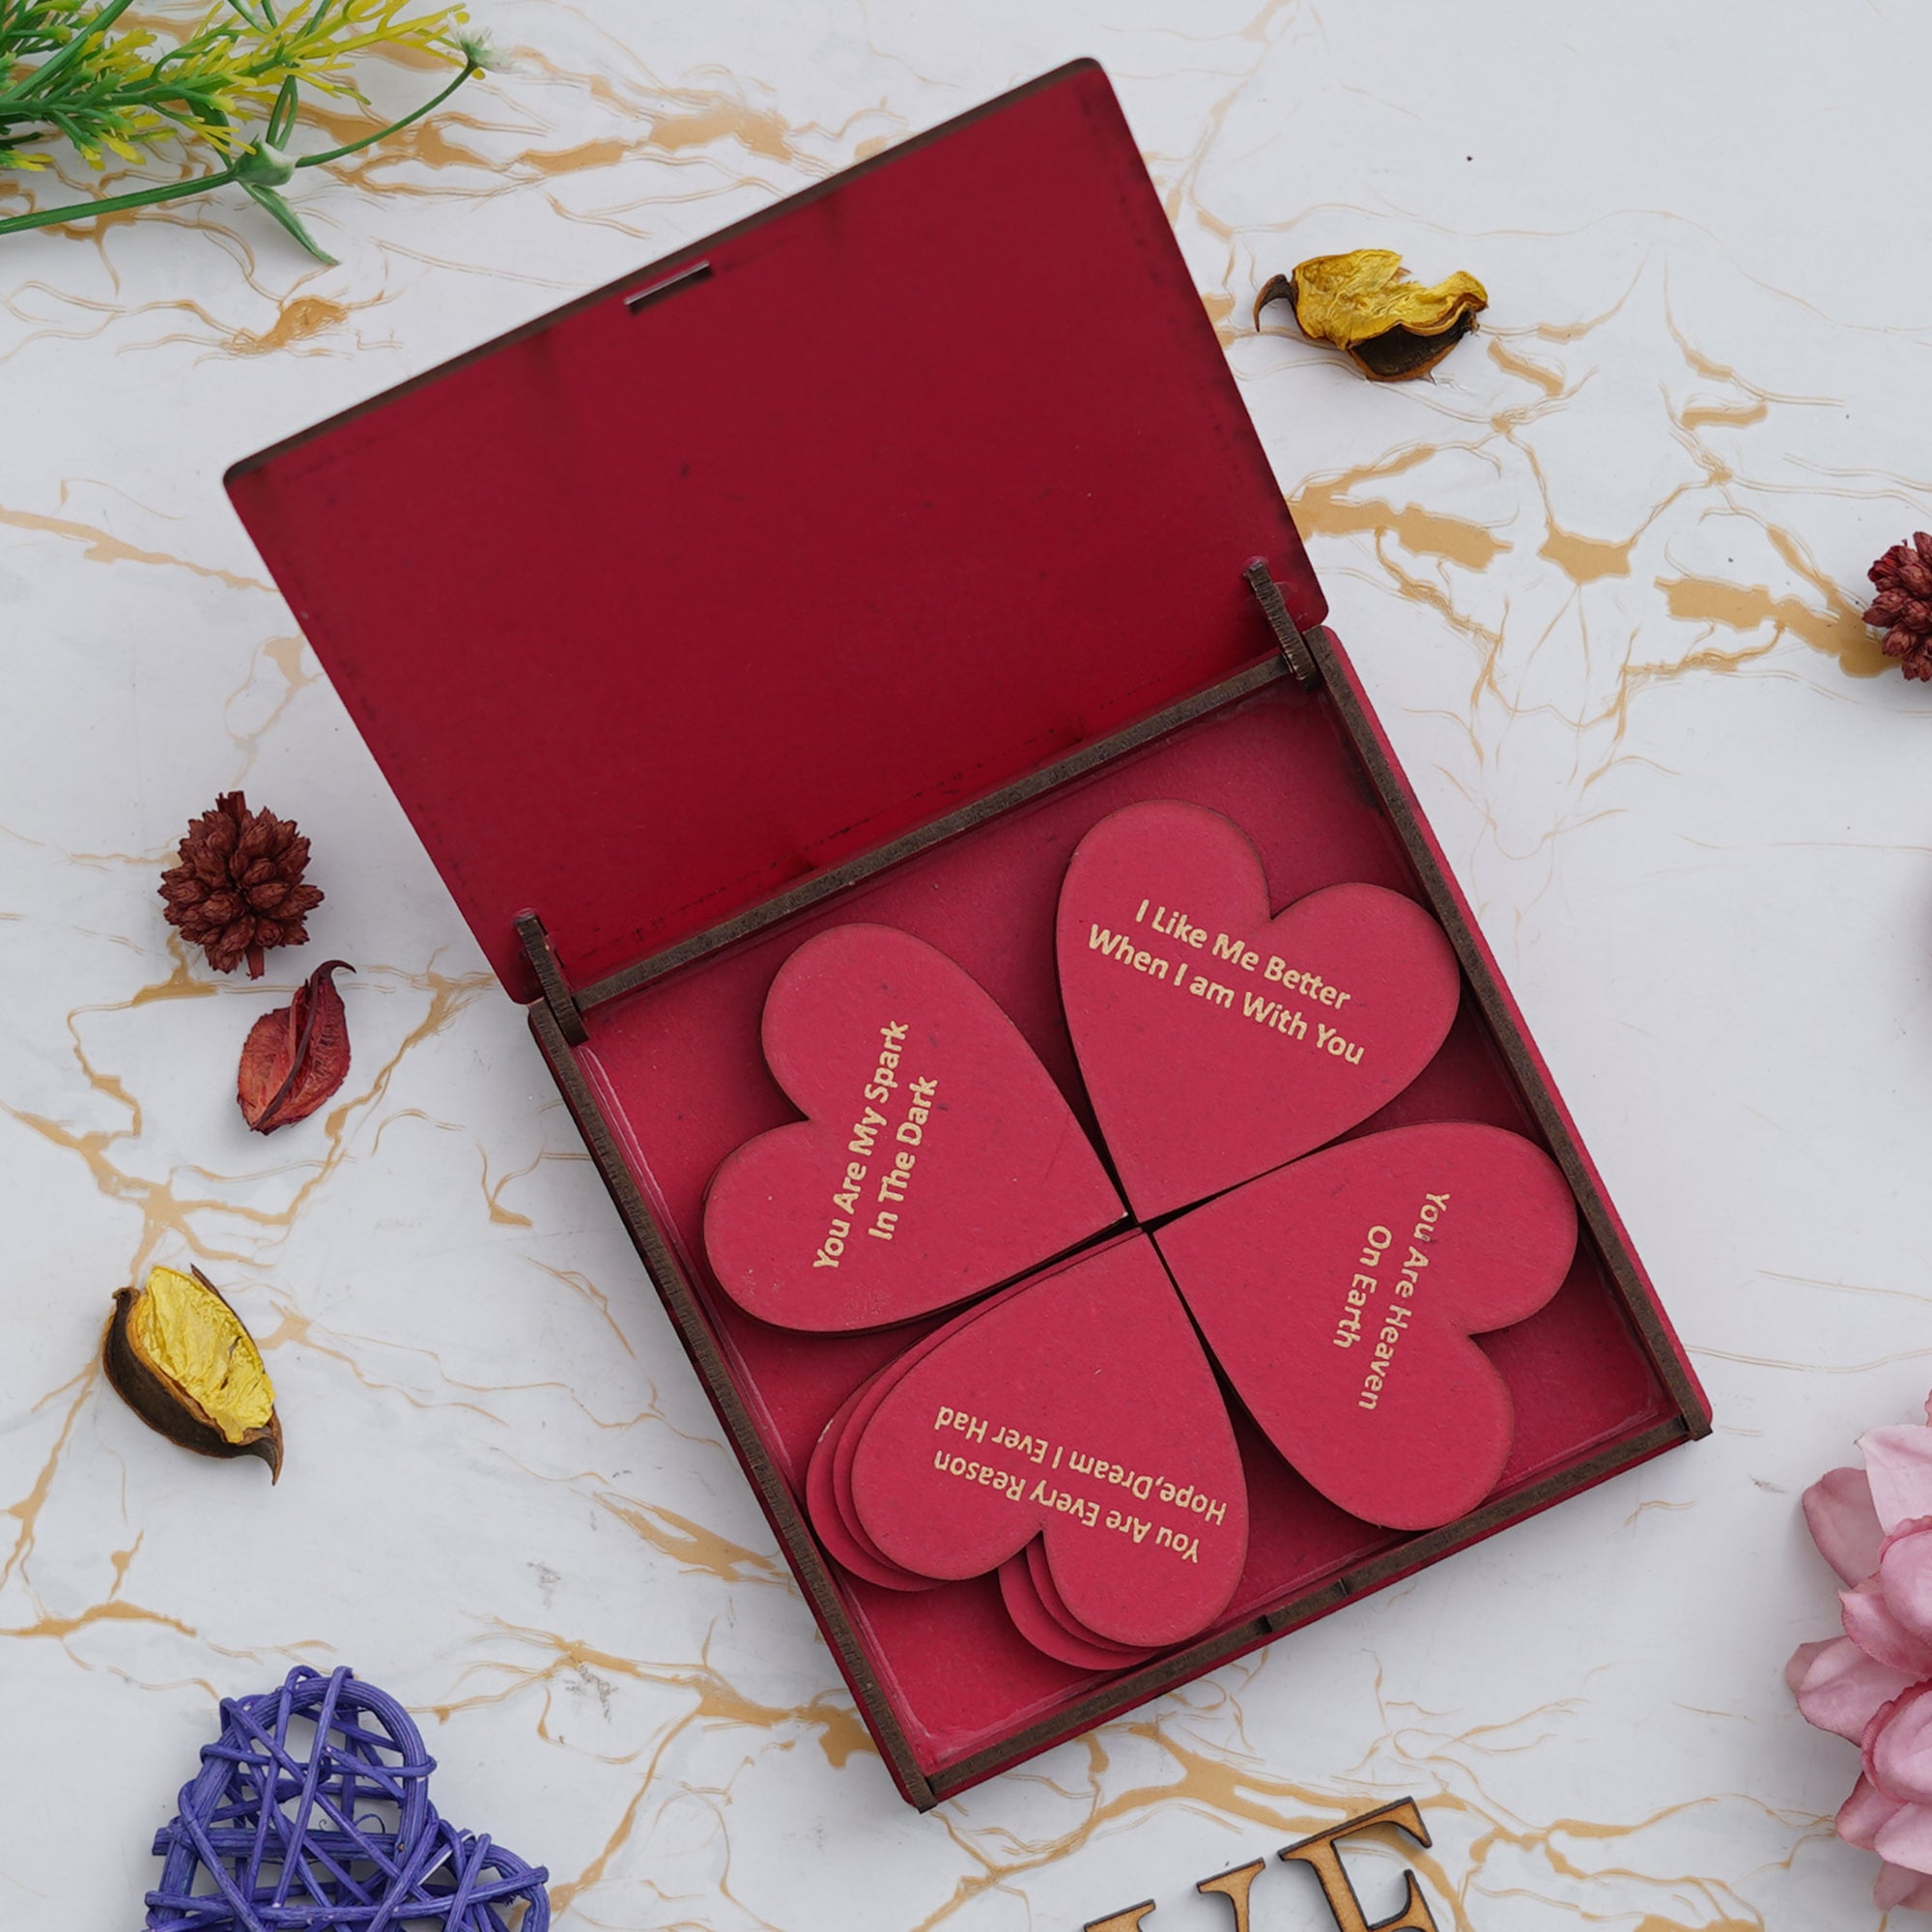 "20 Reasons Why I Love You" Printed on Little Red Hearts Decorative Valentine Wooden Gift Set Box 4